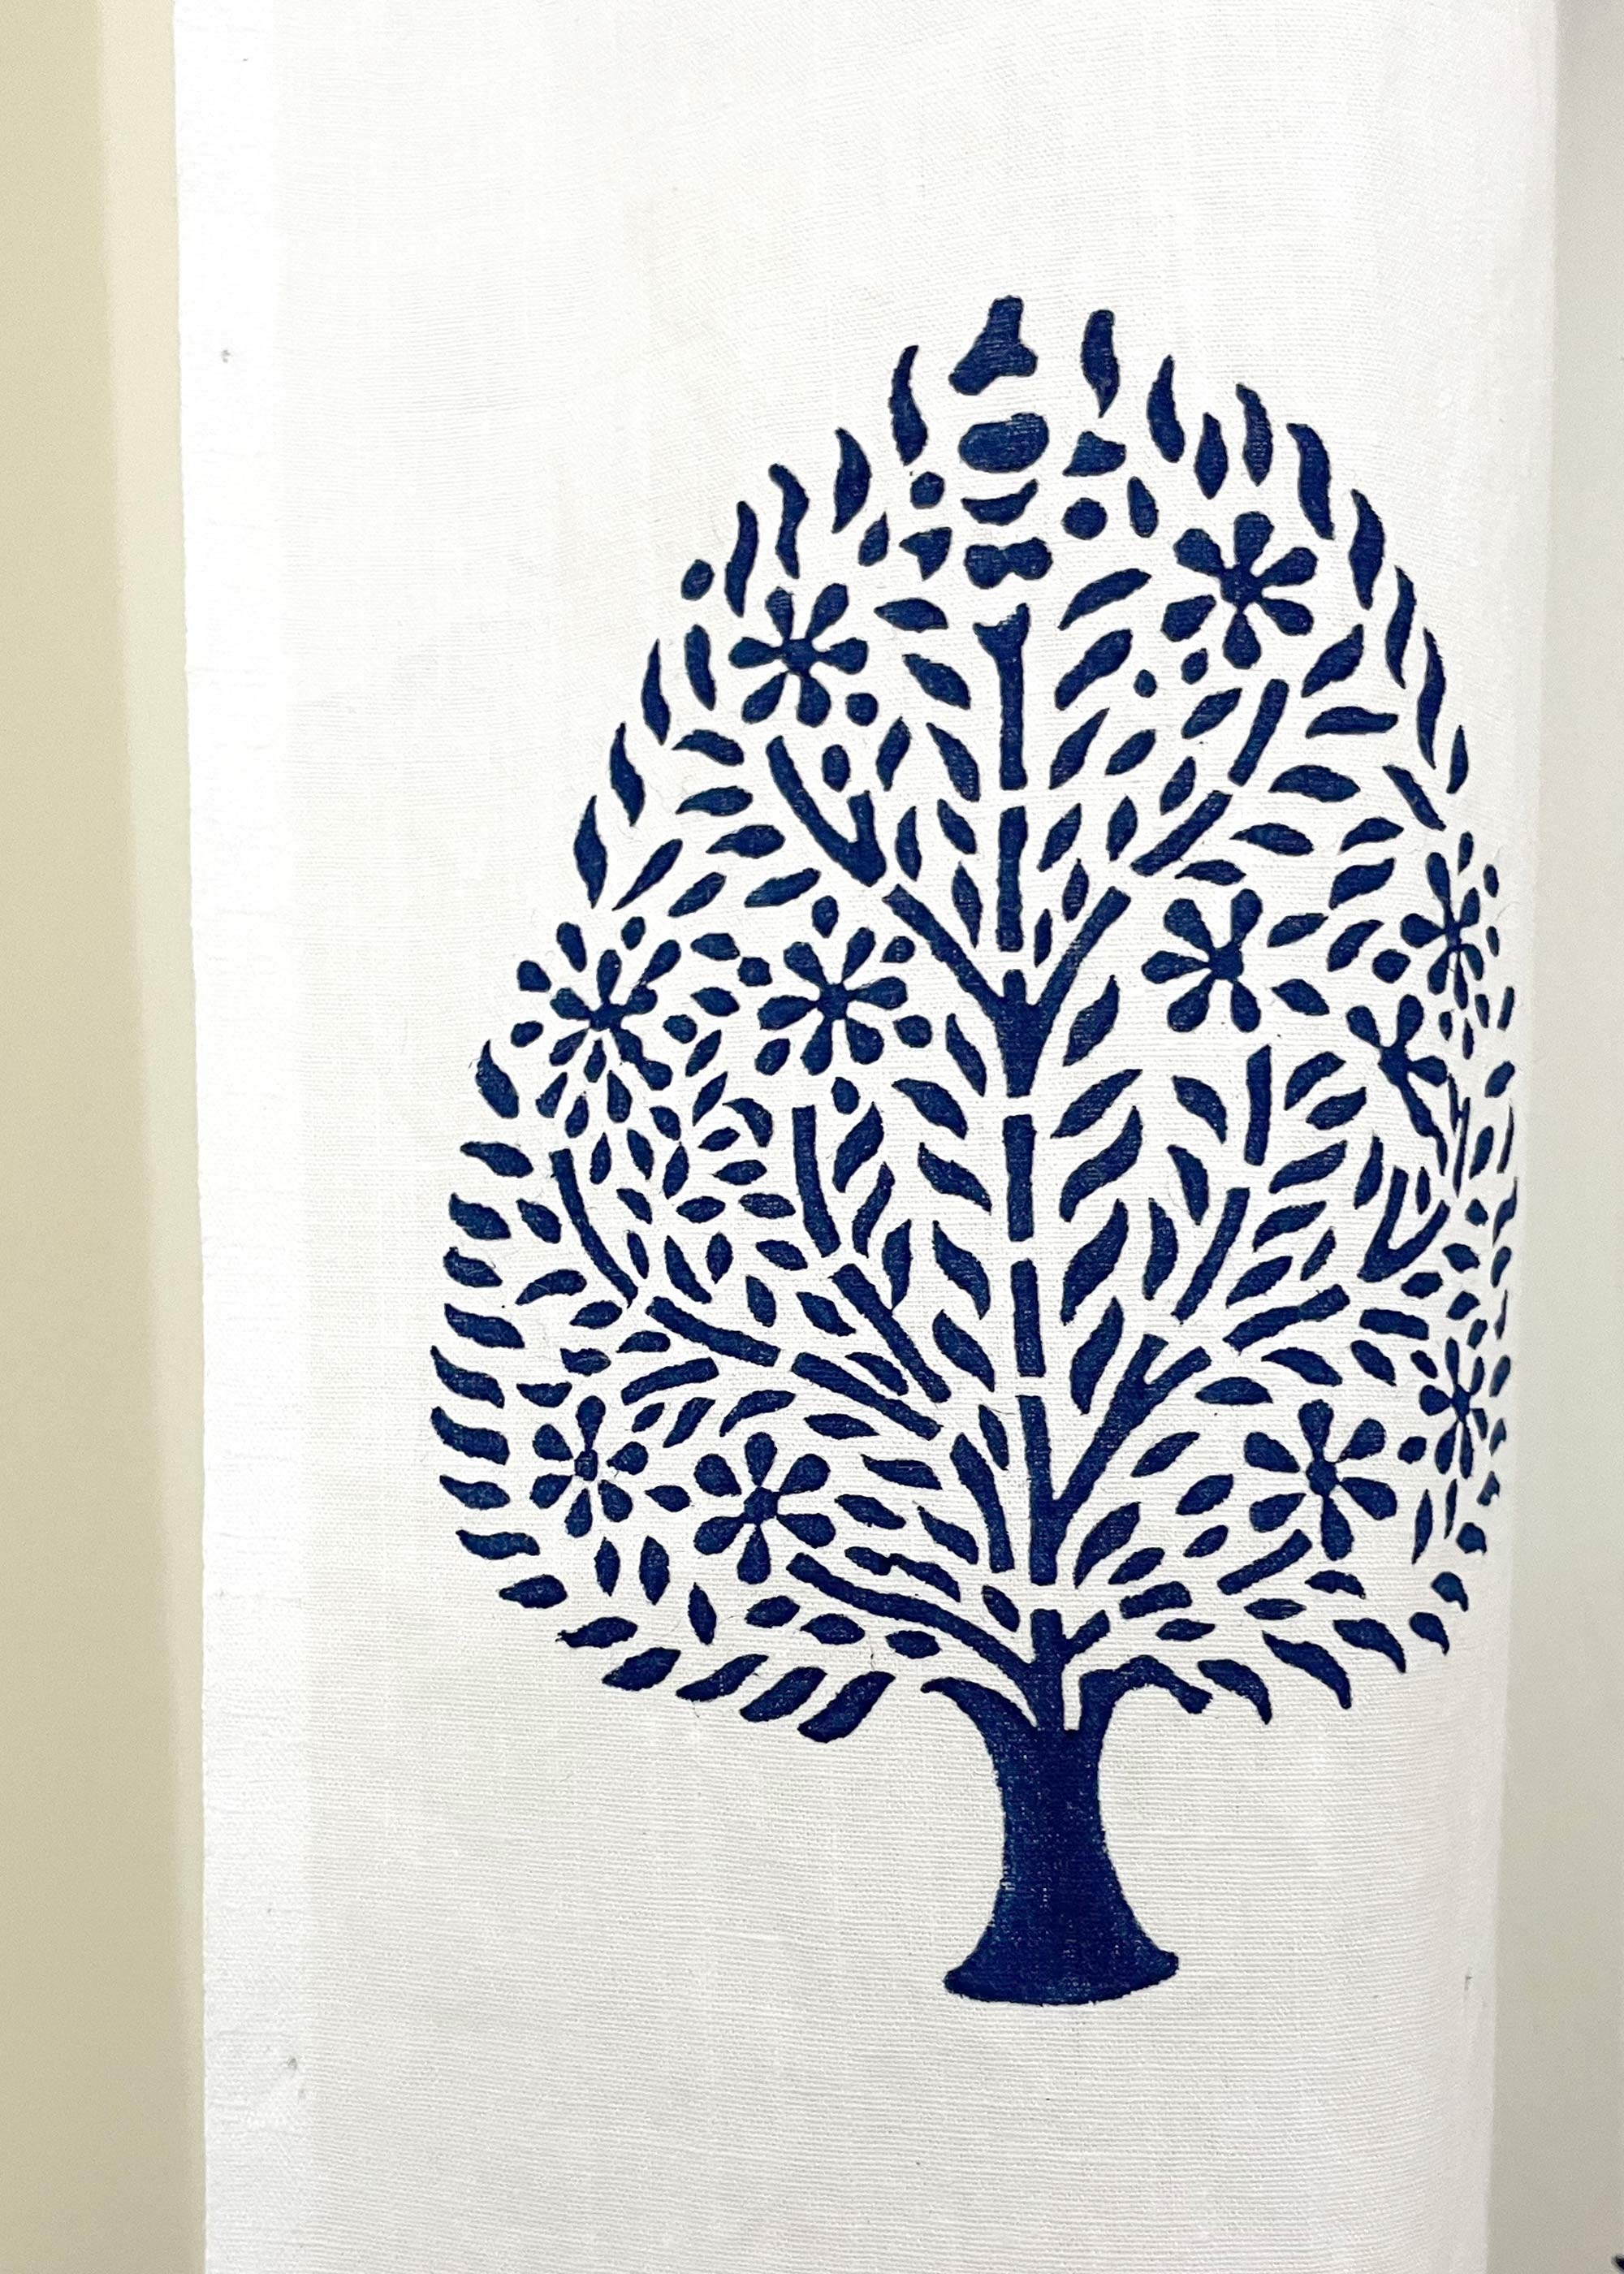 Tree Of Life Hand Block Printed Linen Fabric Buy Online from DesiCrafts